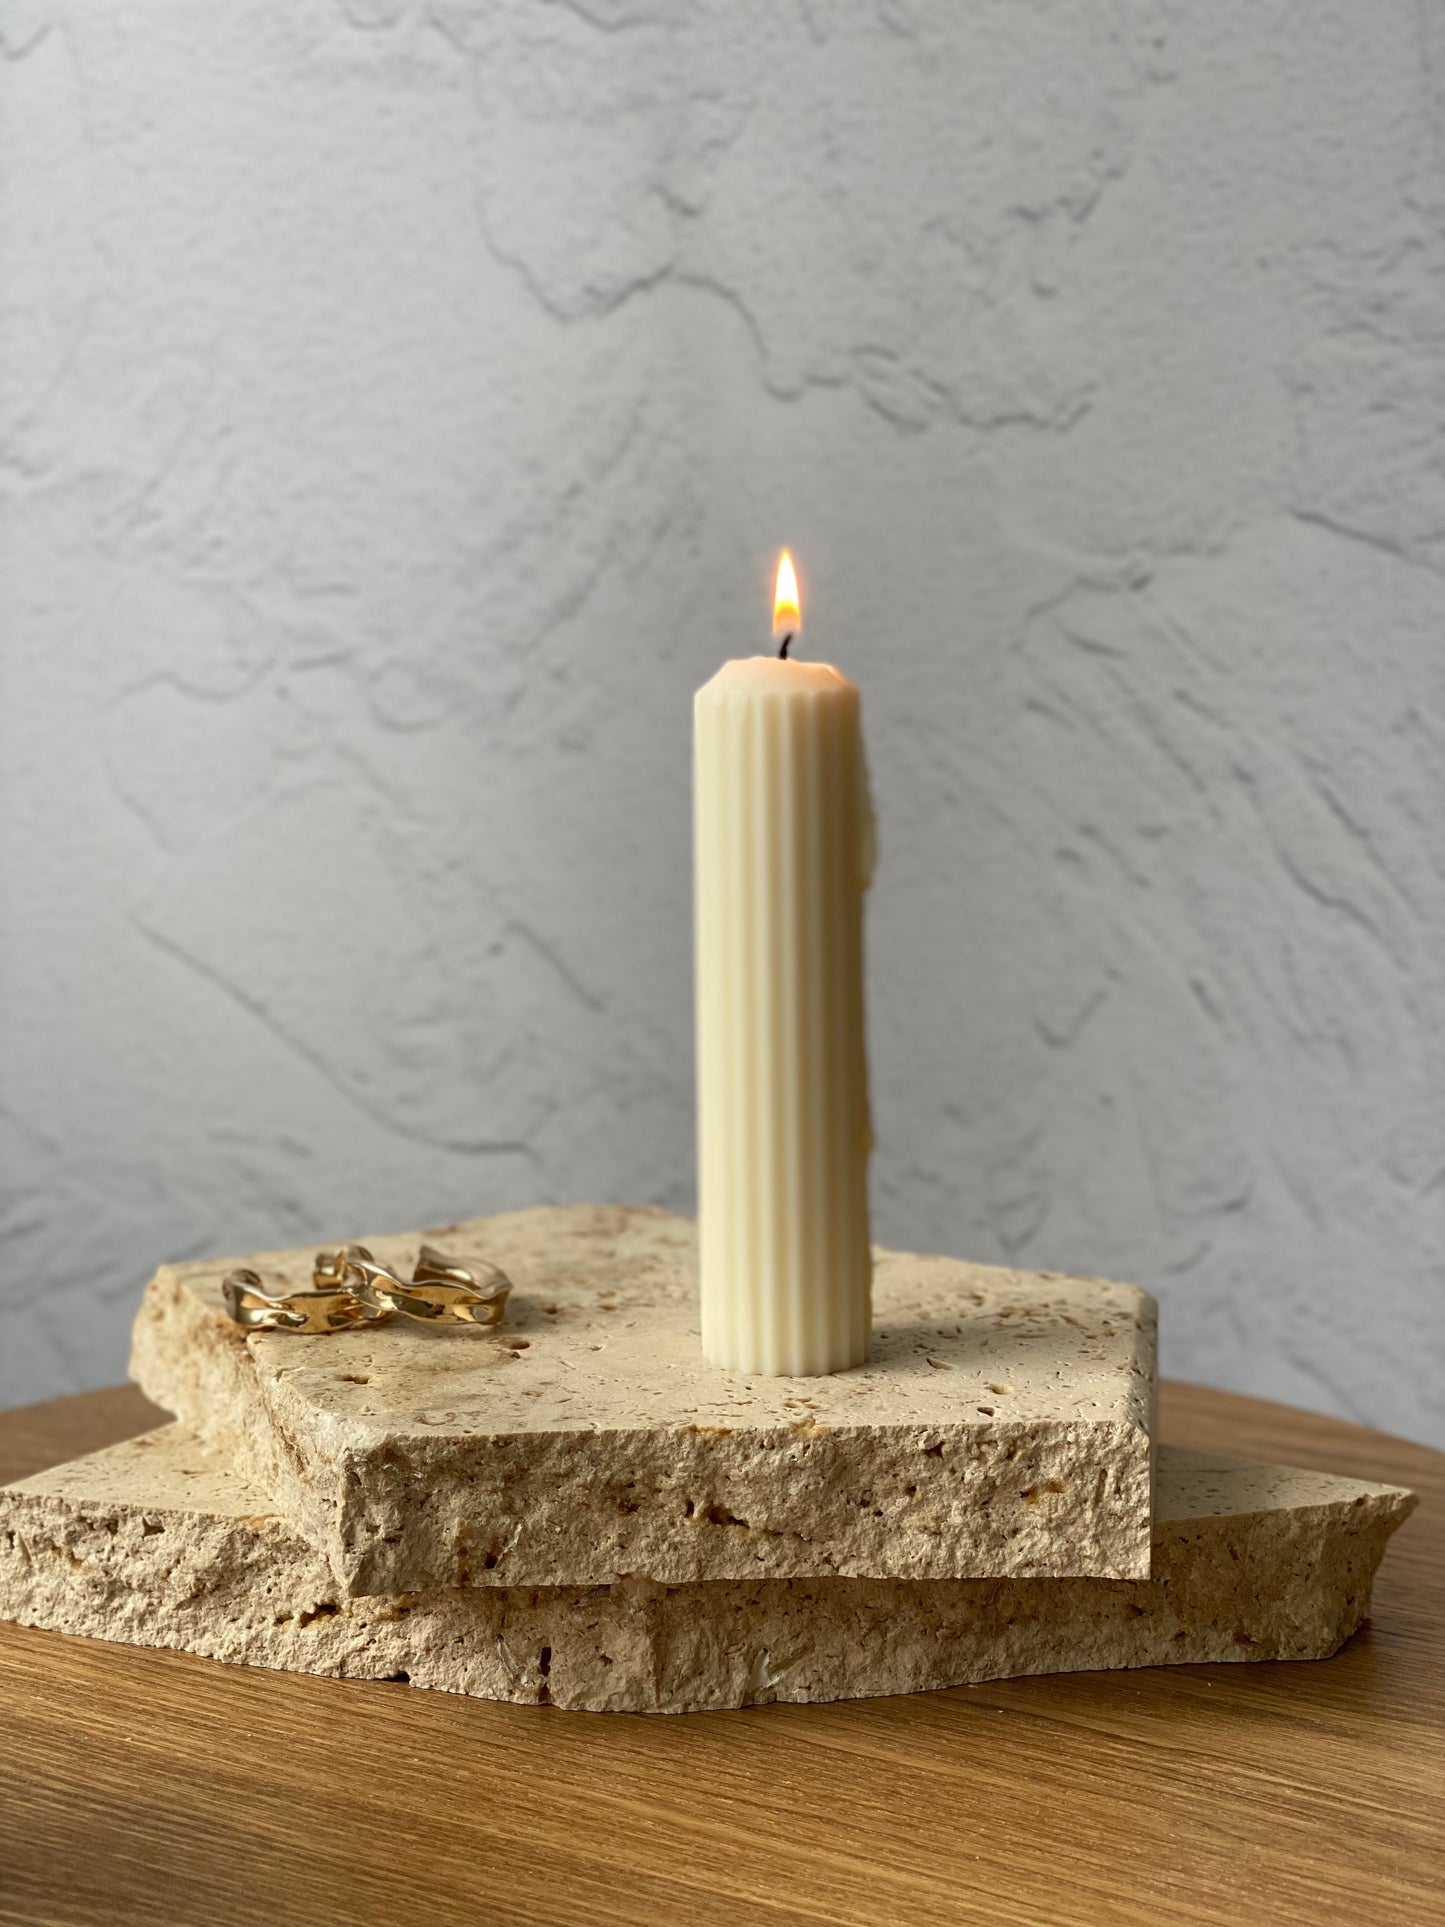 Case 15cm Thin Ribbed Pillar Candle | Wedding reception candles | Candle wedding centerpieces on a budget | Free Standing Candles | Paraffin Free Candles | Unscented Candles | Column Candles | Free Standing Candles Australia | Candles Australia | Sydney C